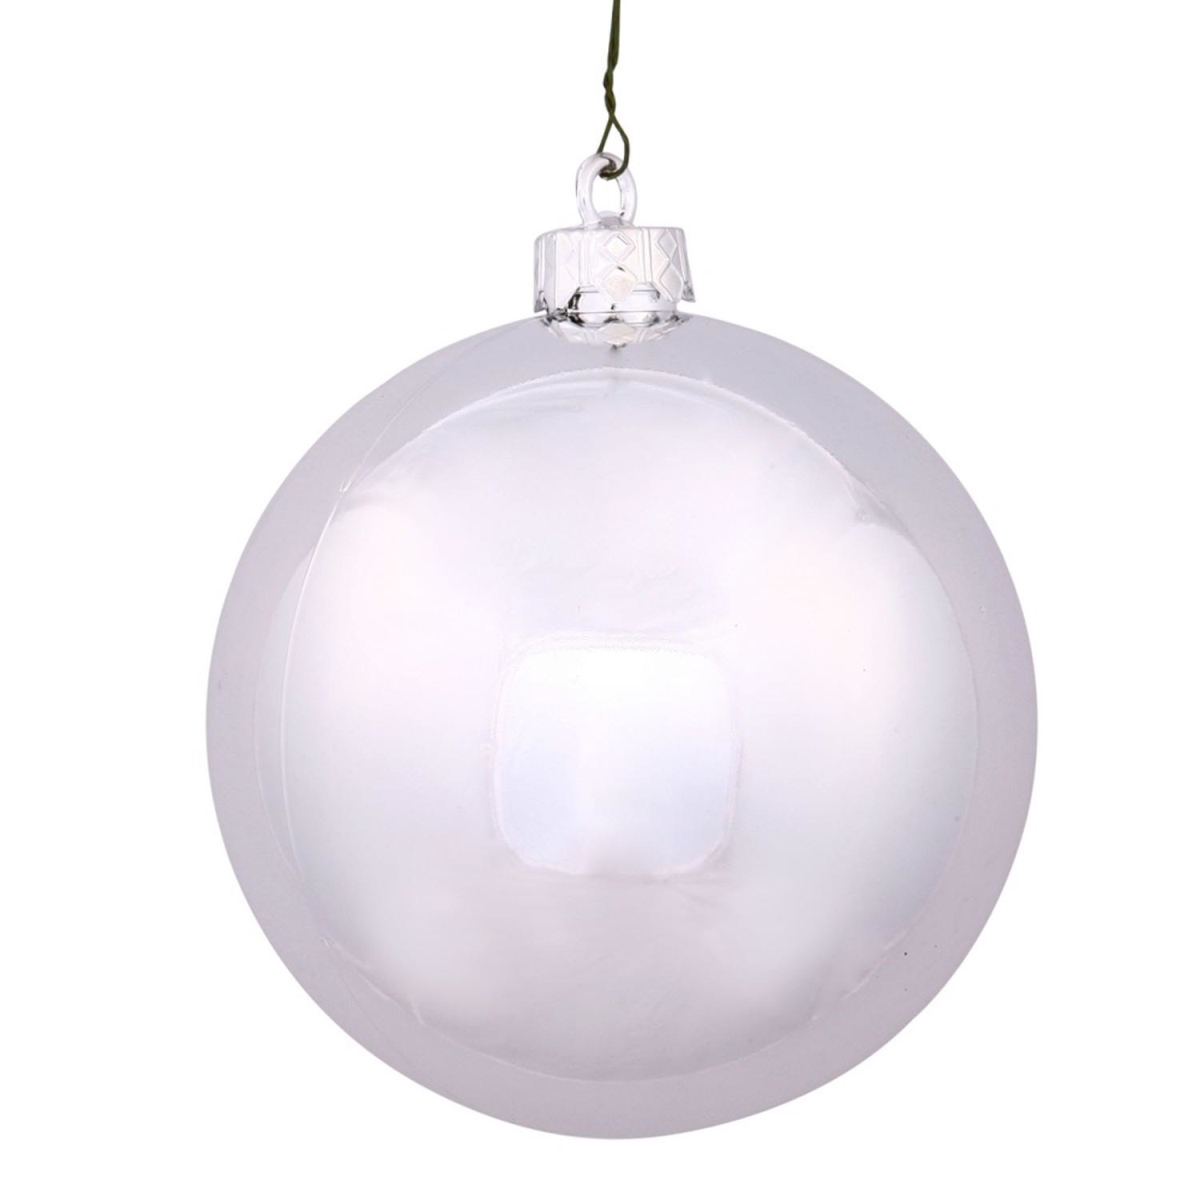 31749128 Shiny Silver Uv Resistant Commercial Drilled Shatterproof Christmas Ball Ornament - 2.75 In.